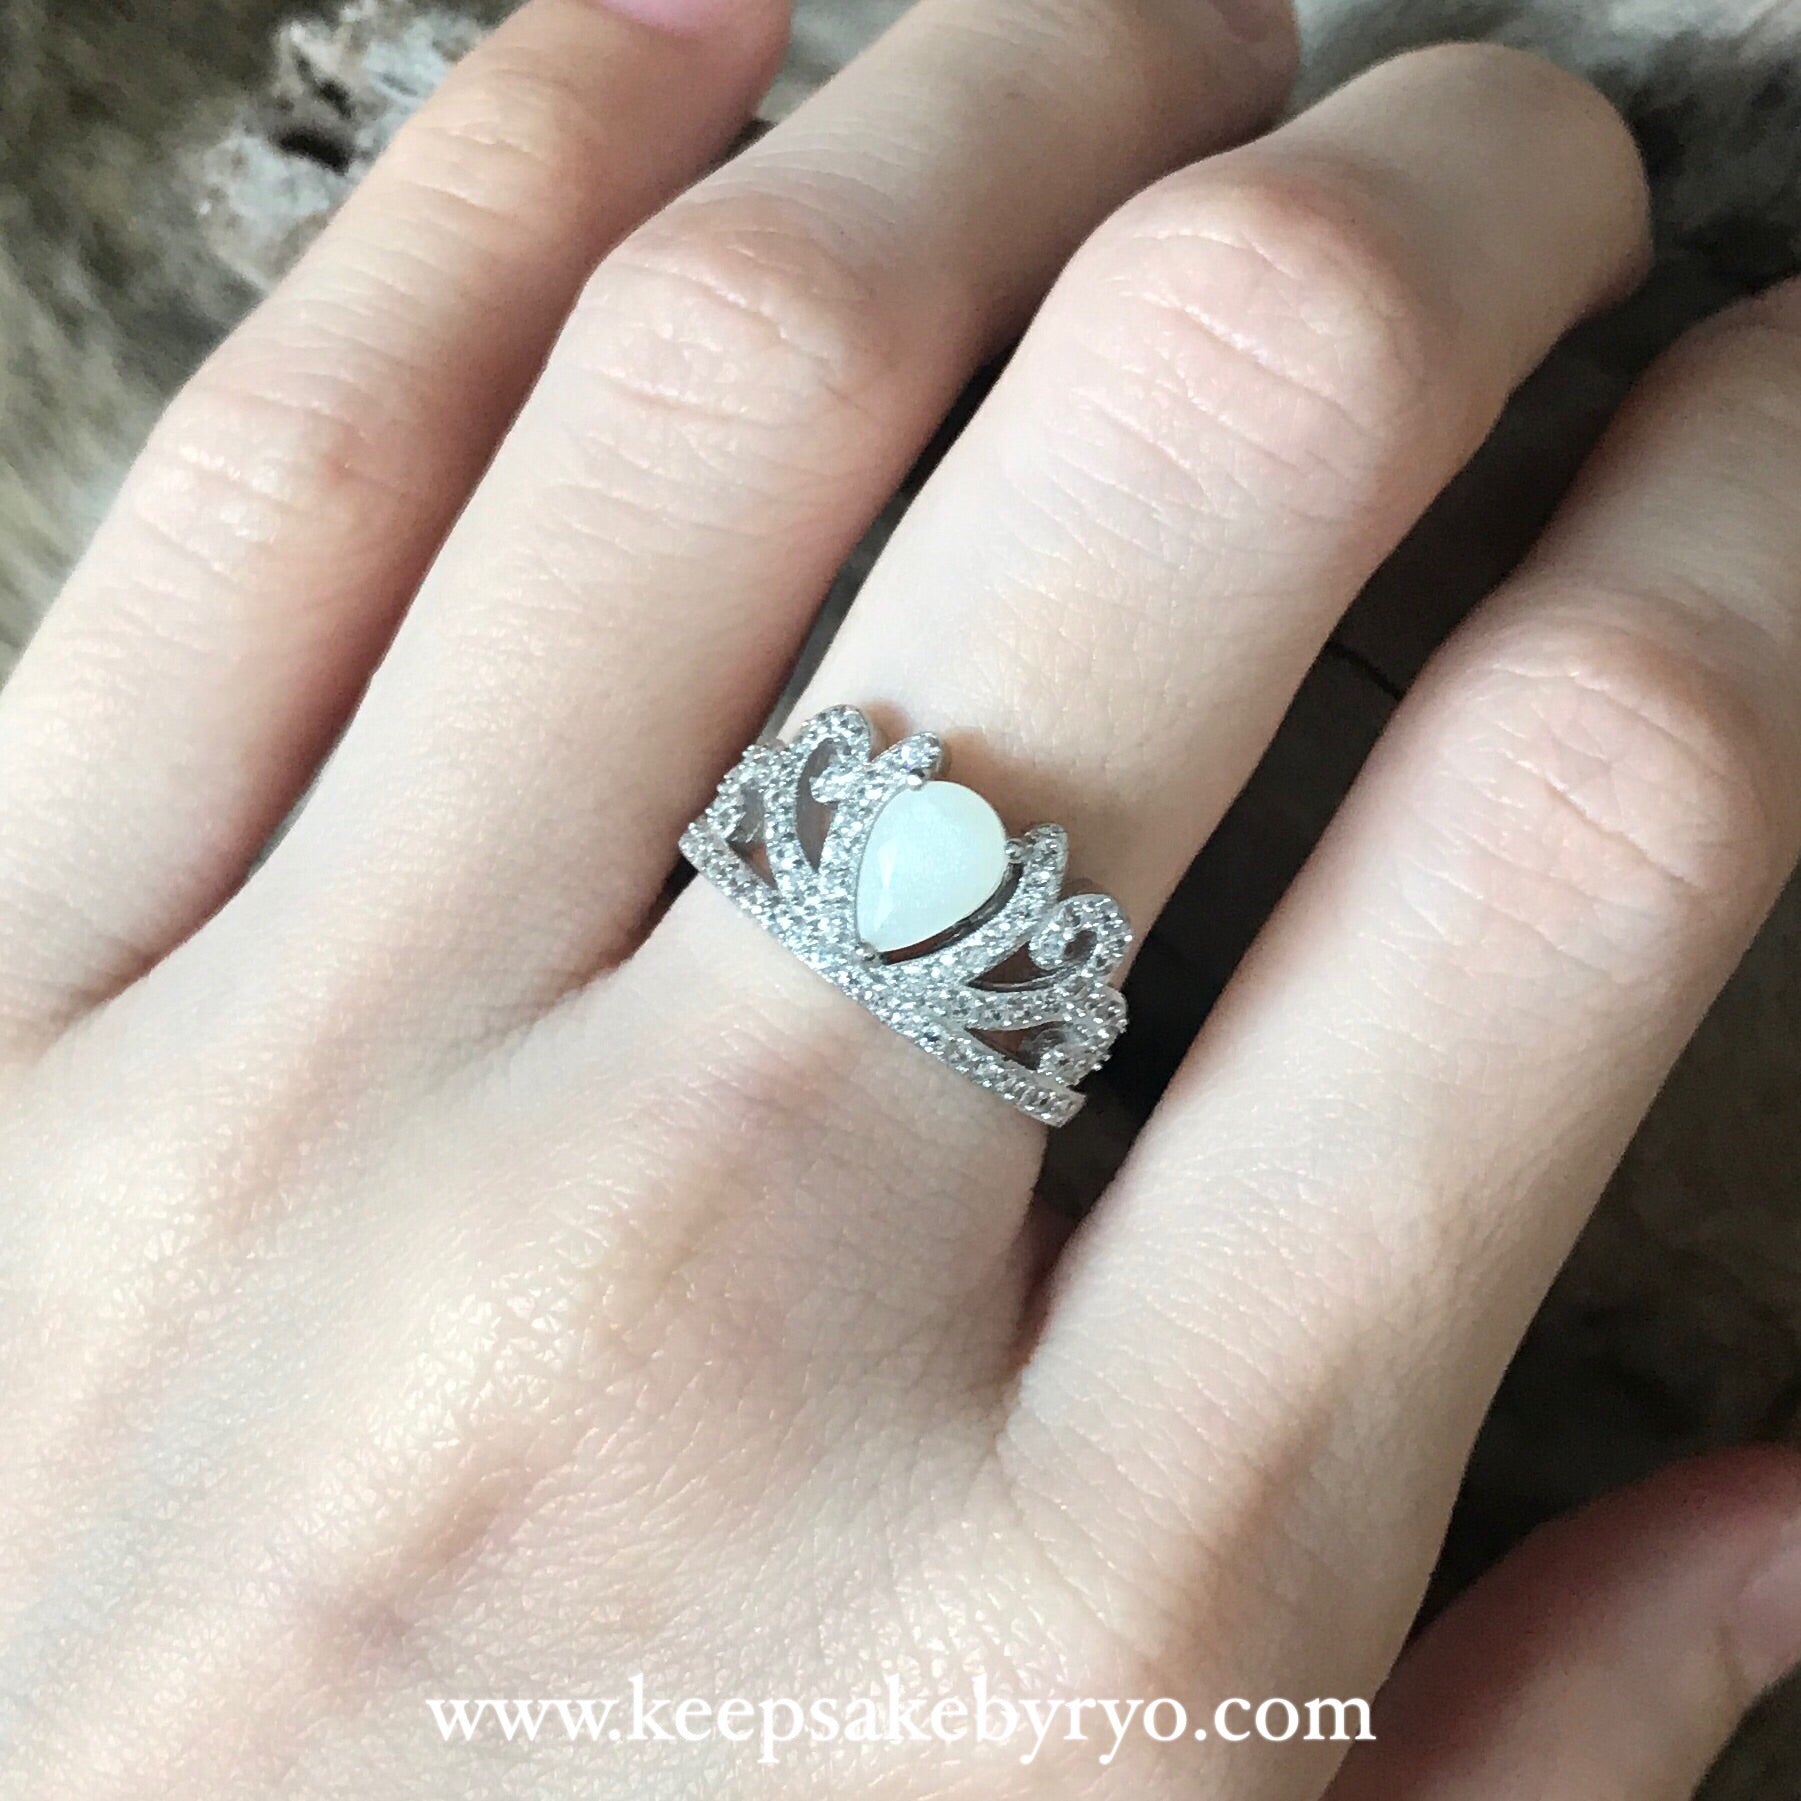 SOLITAIRE: PRINCESS RING WITH TEARDROP INCLUSION STONE